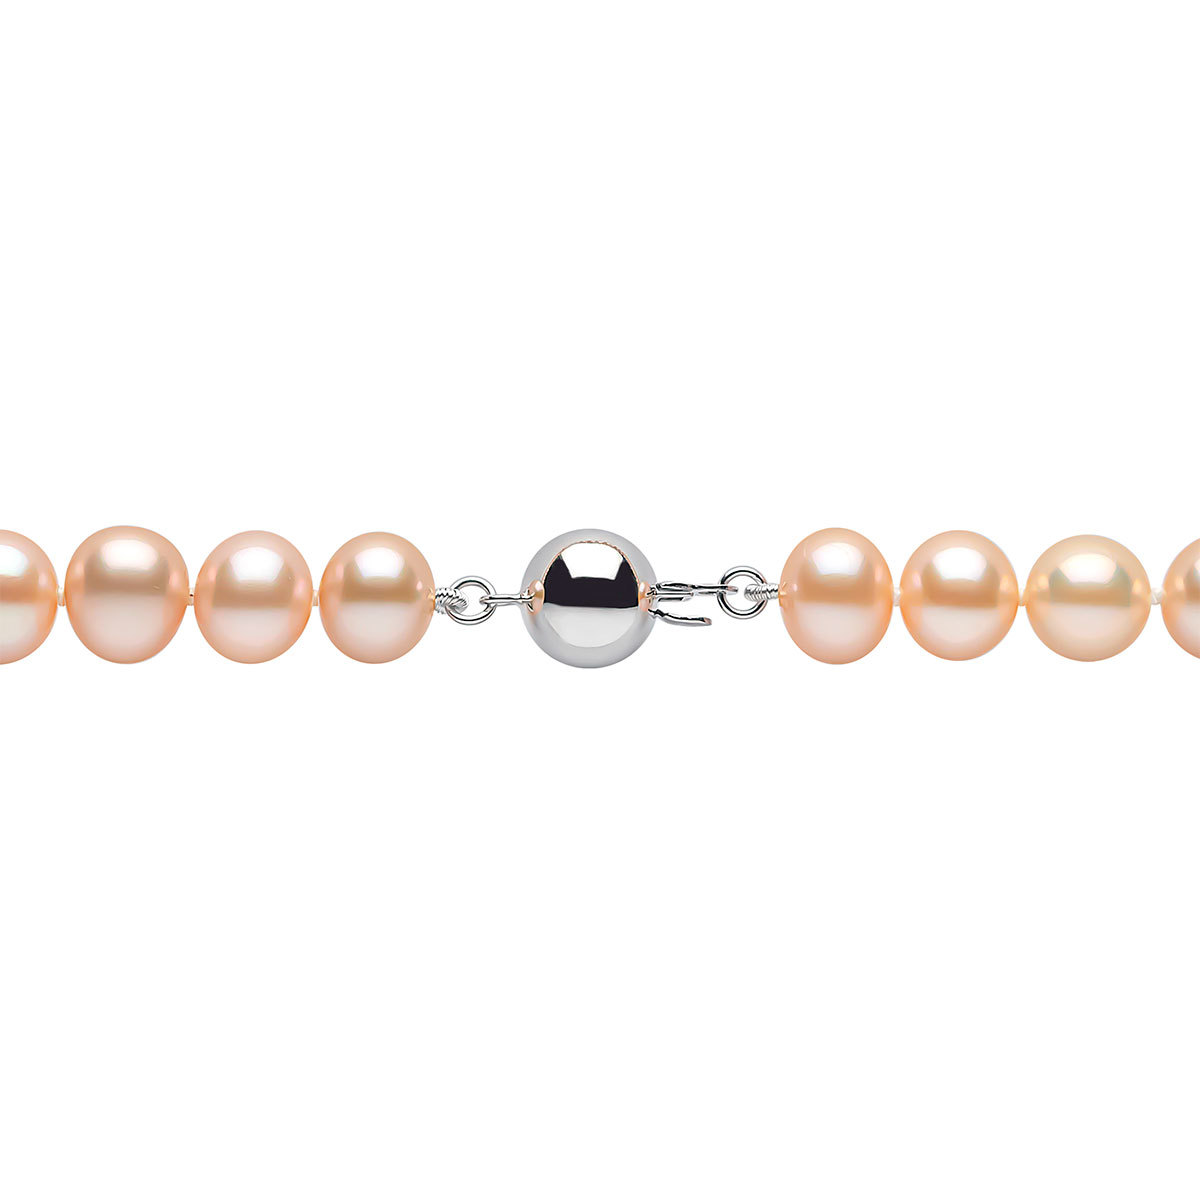 6-6.5mm Cultured Freshwater Peach Pearl Bracelet, 18ct White Gold